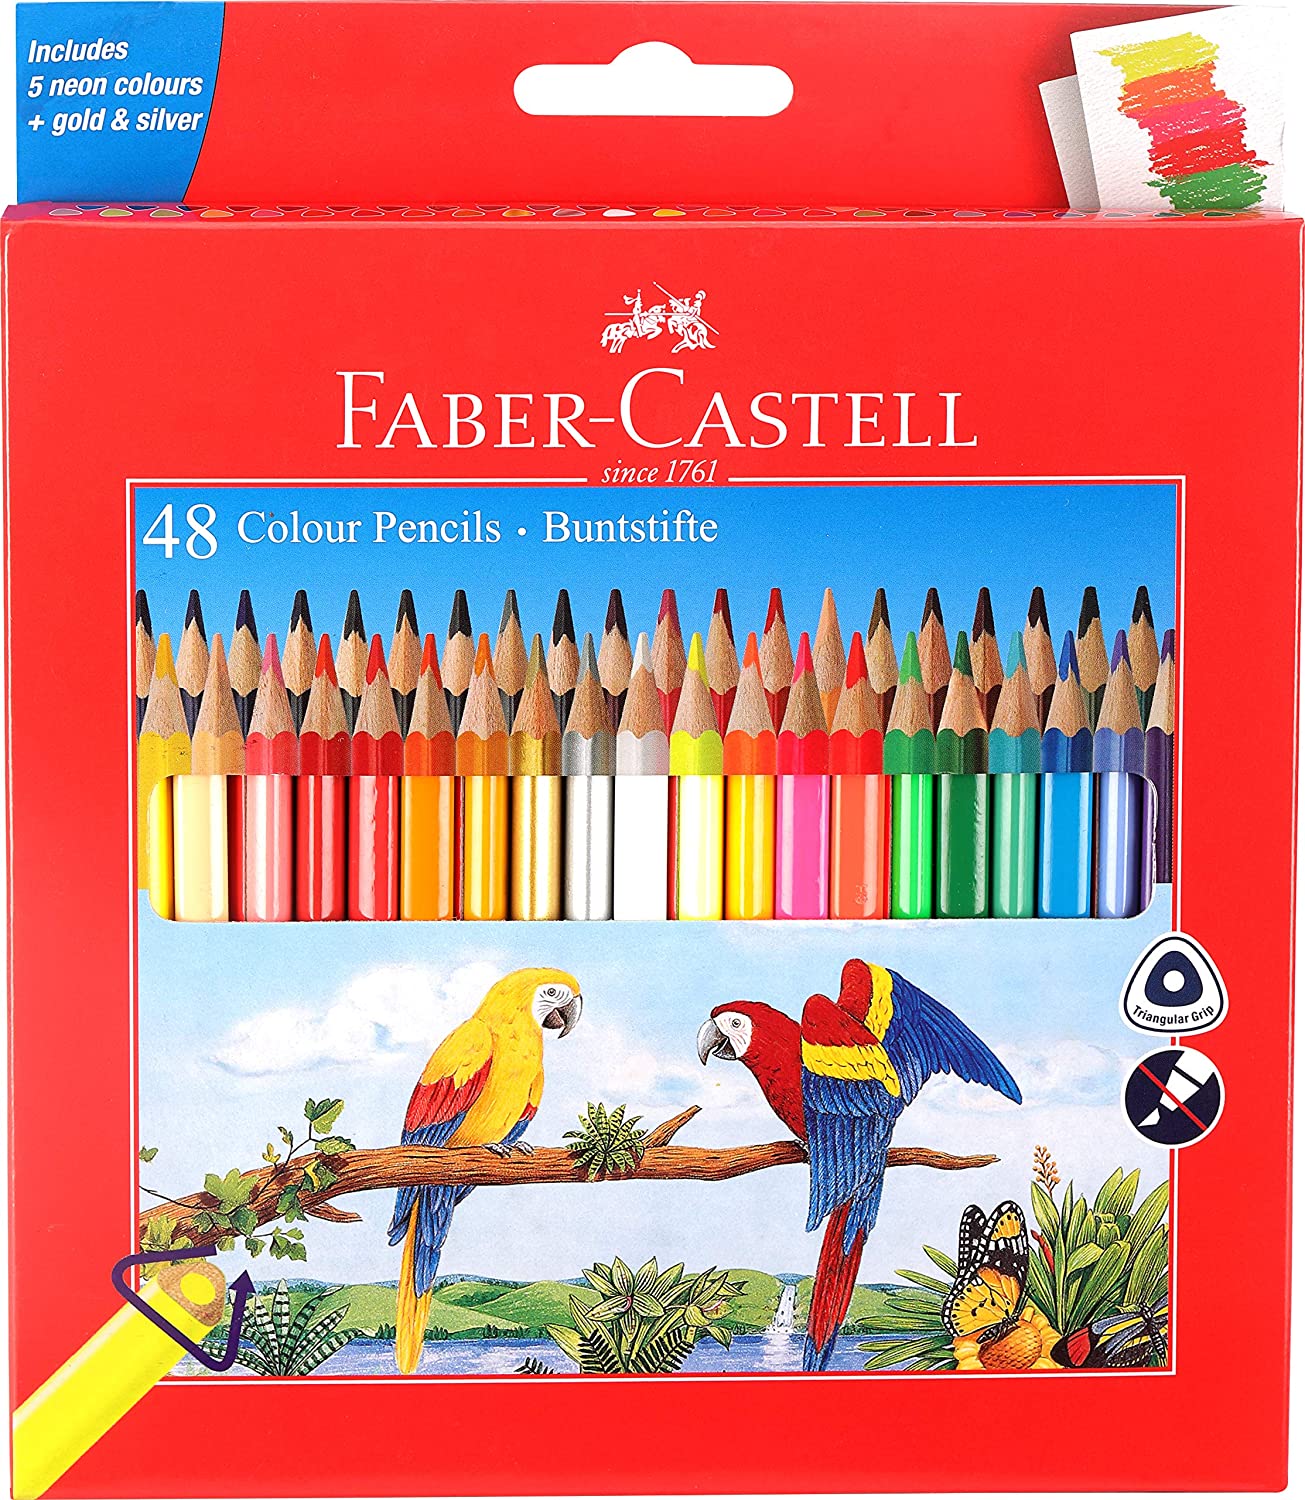 worth it brands - Faber Castell colored pencils